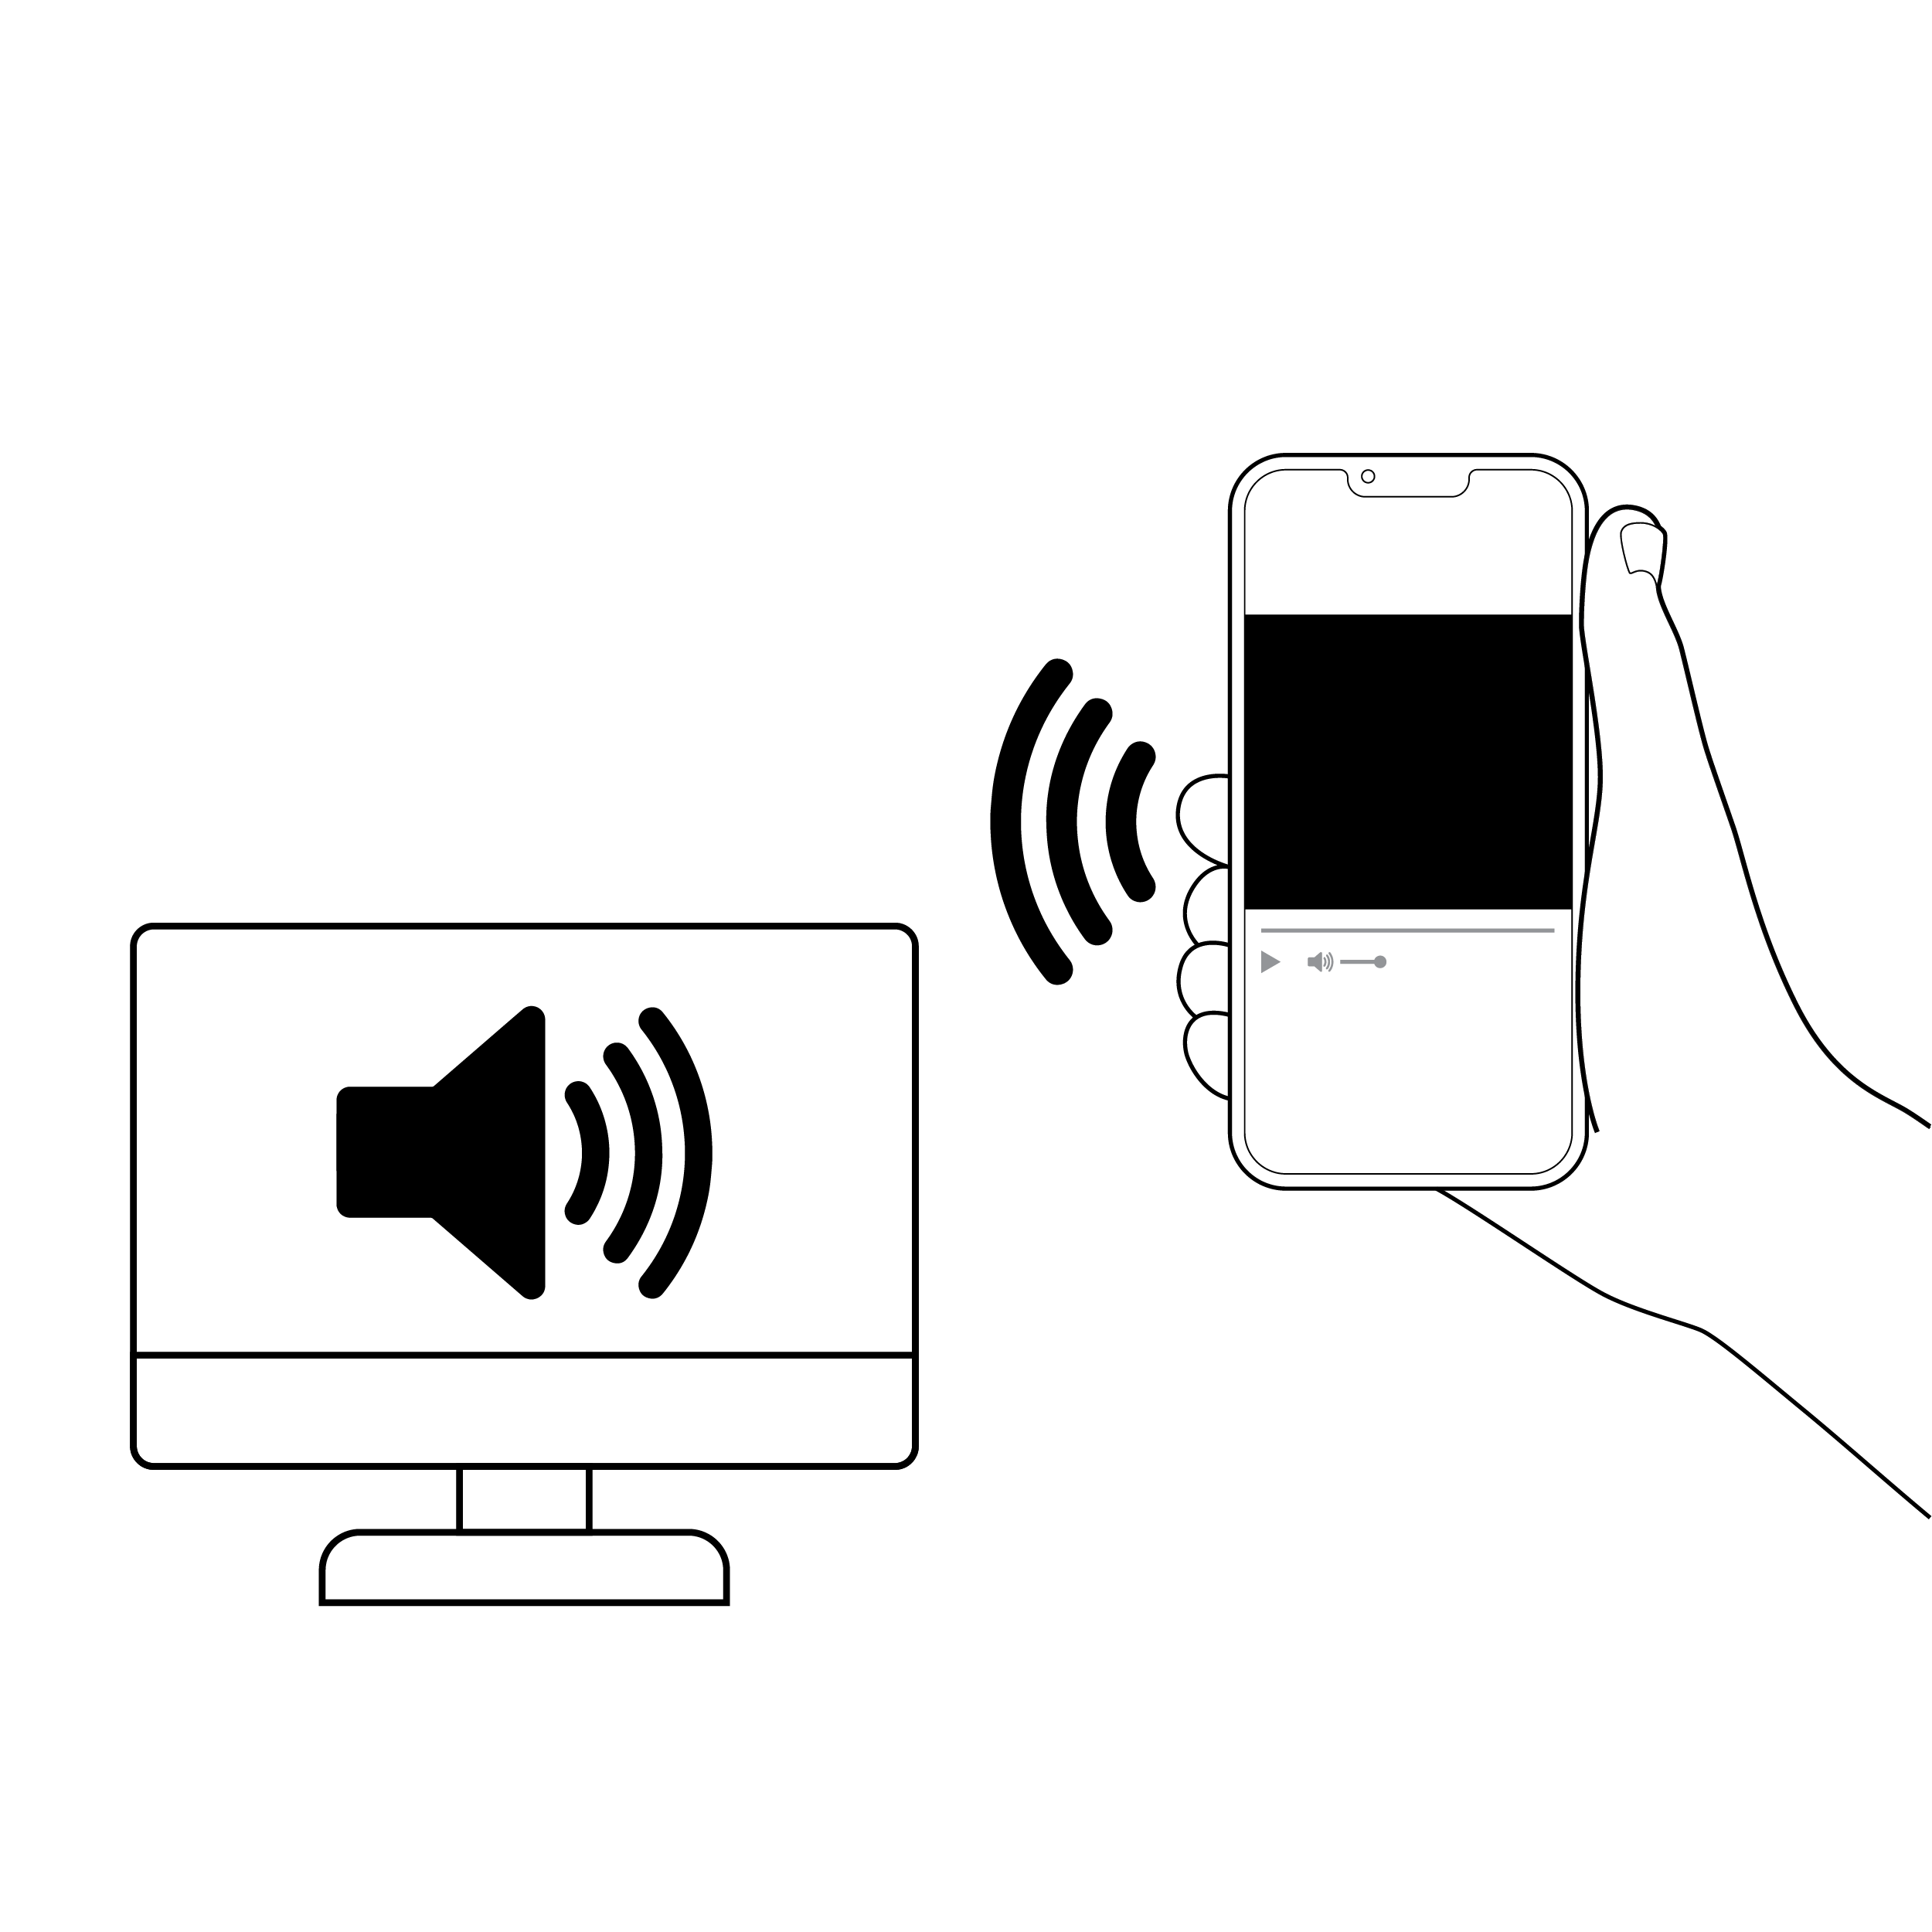 Desktop computer with audio/sound symbol. A hand holding a mobile phone that shows an audio file being played.